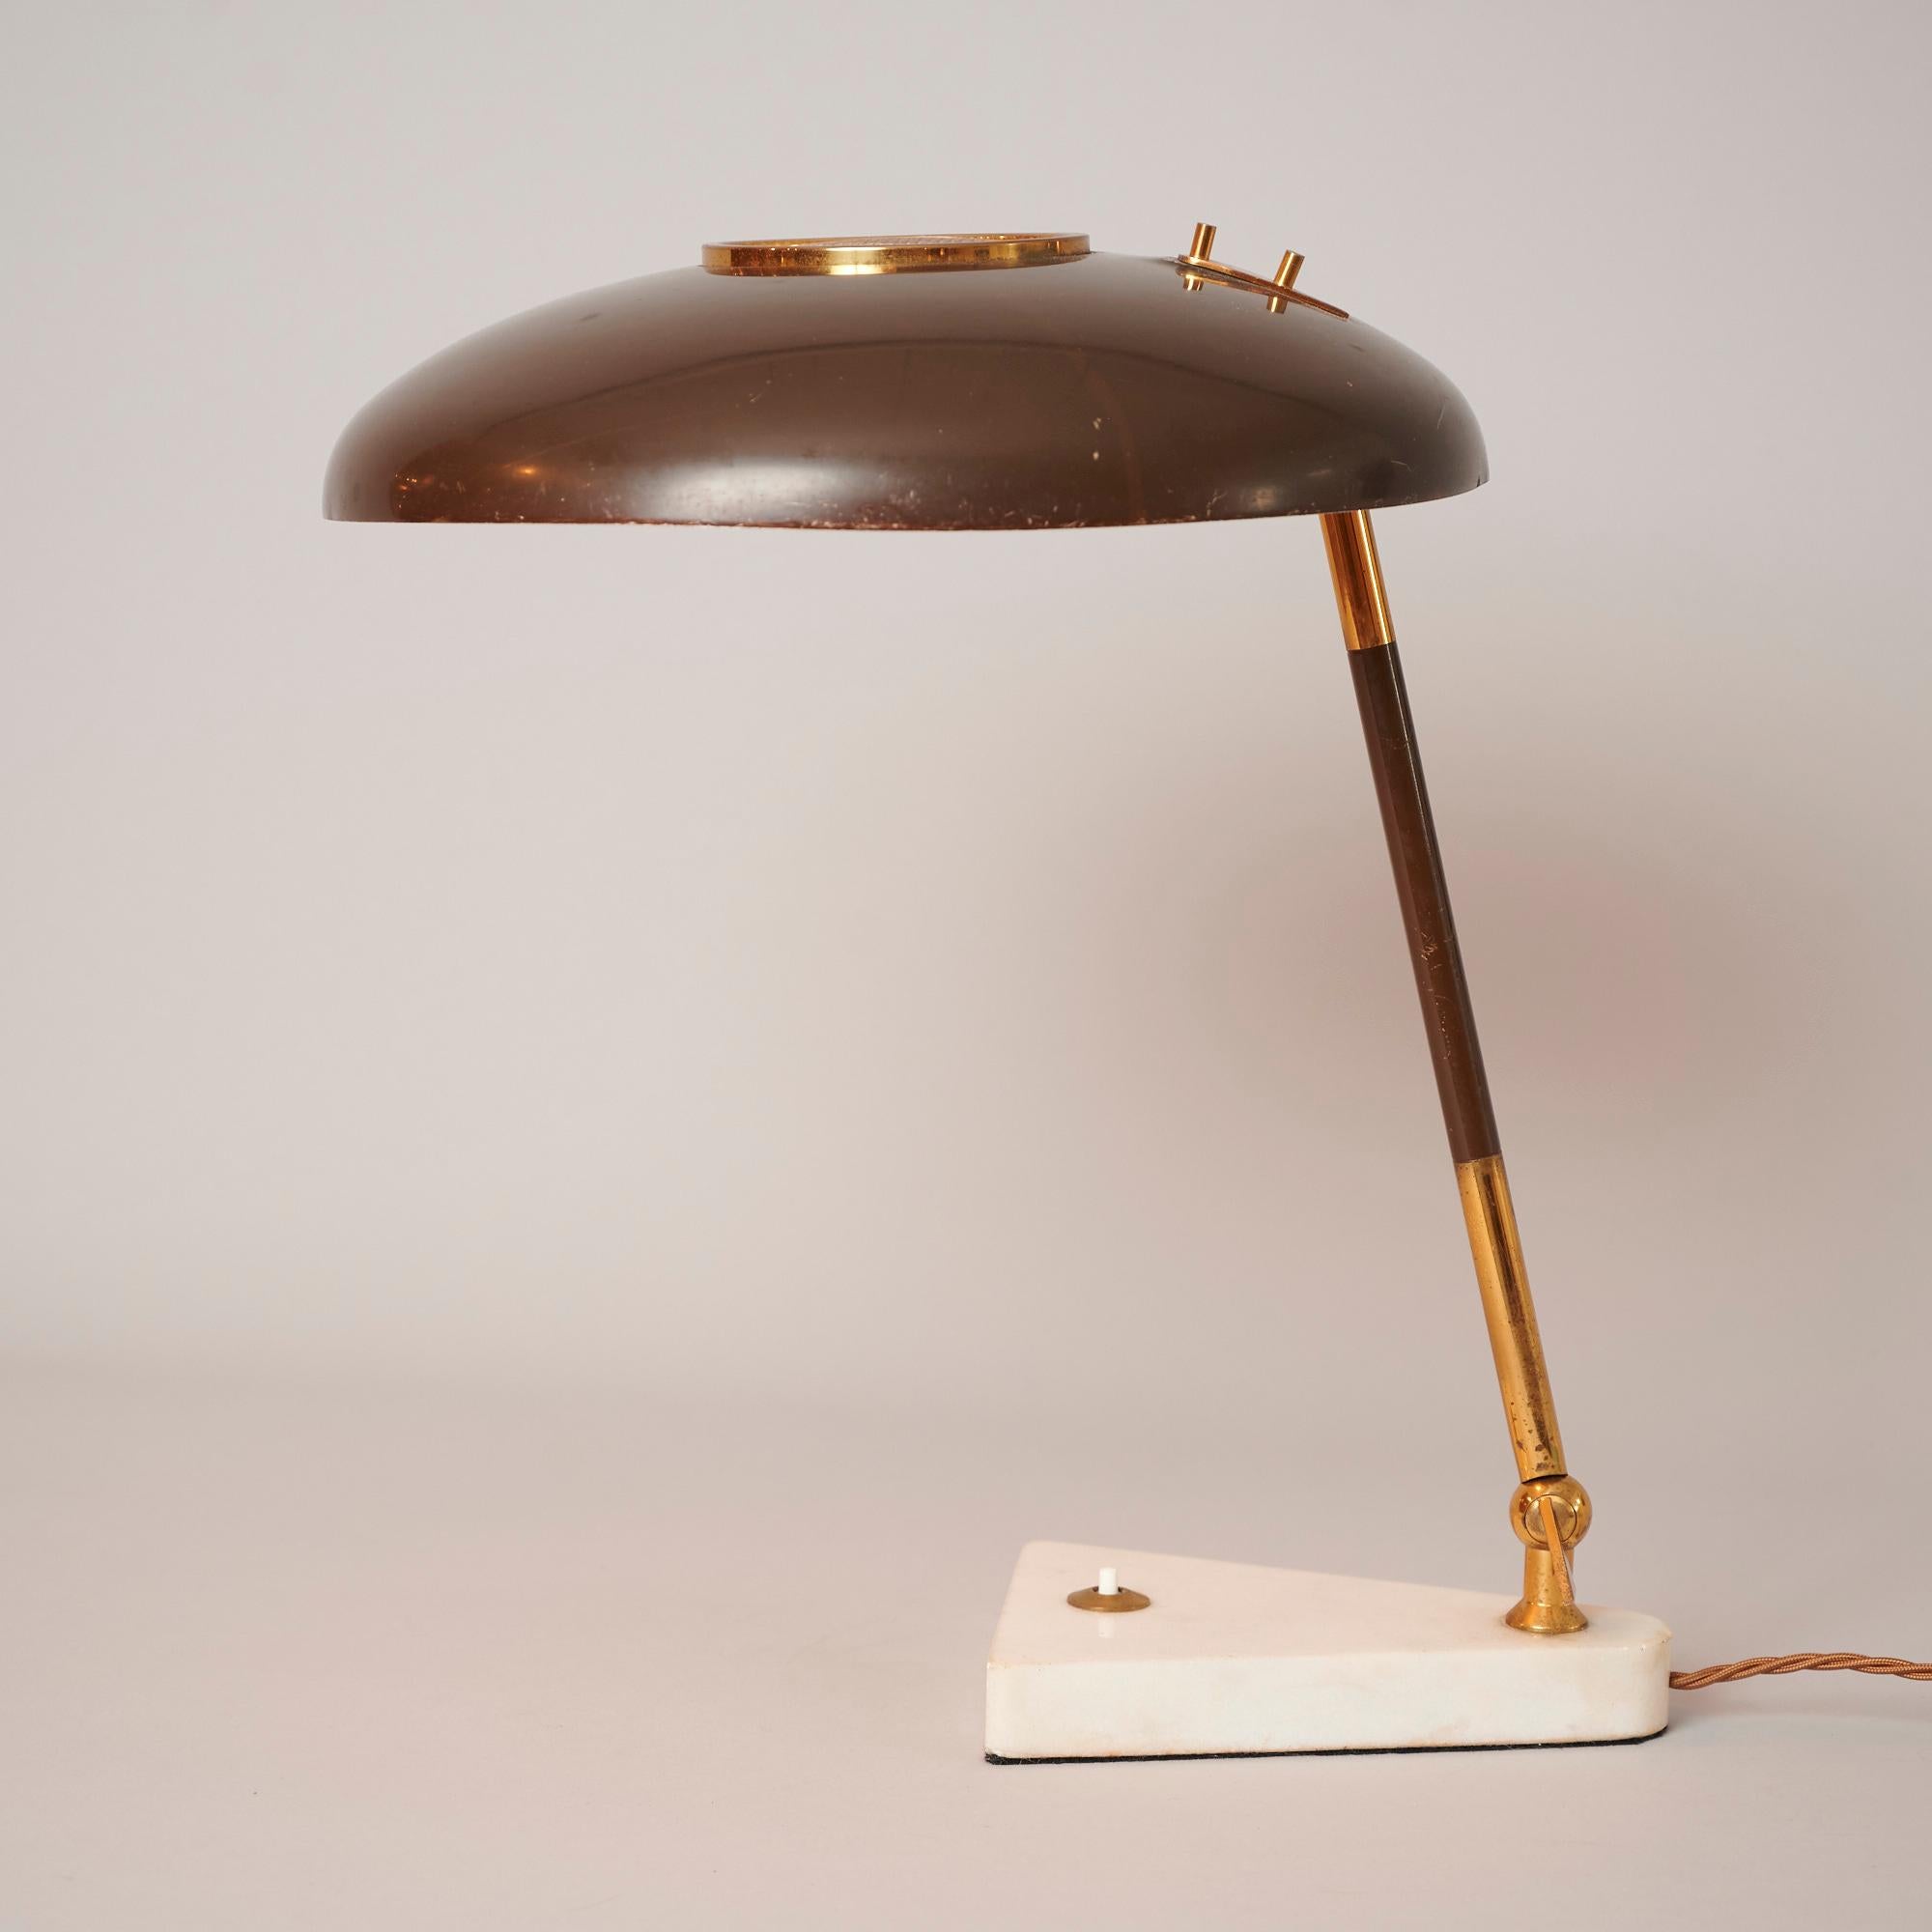 Original 1950s Oscar Torlasco desk lamp with original brown paint shade. 

Marble base and brass elements. 

In good overall condition.